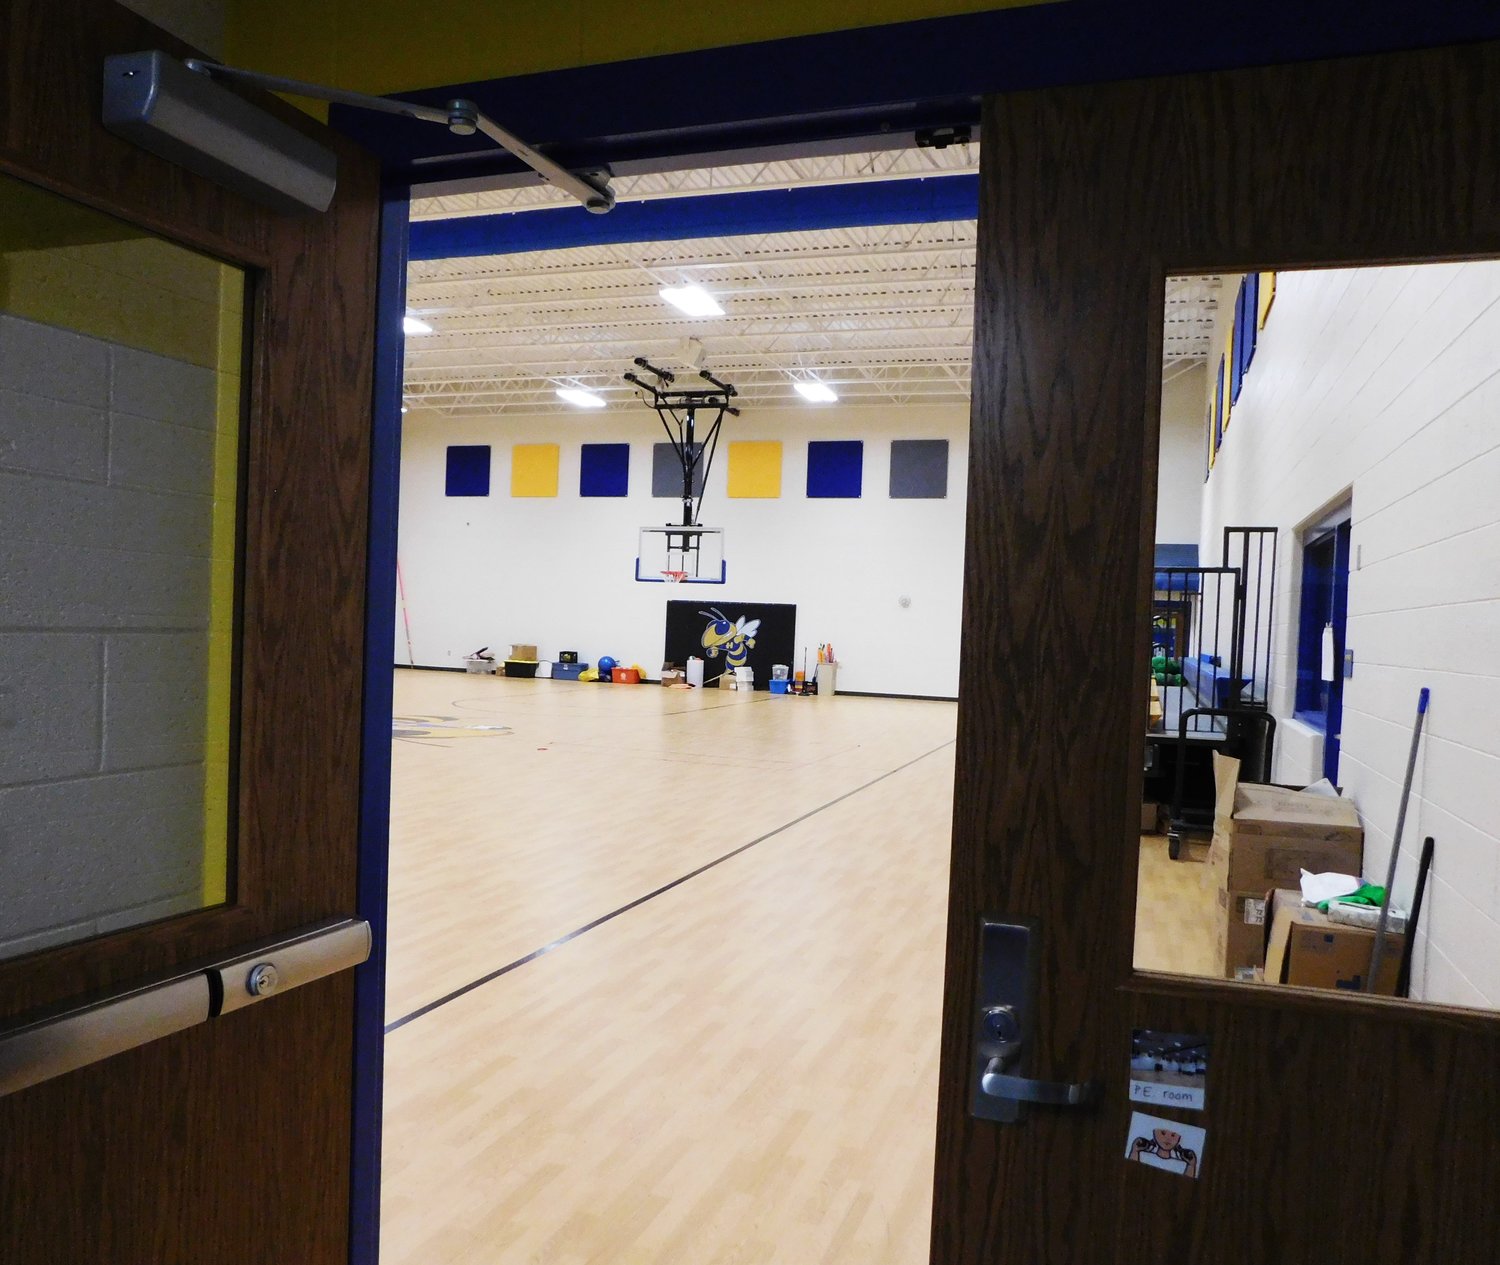 The halls of the newly renovated Larson Elementary School are lined with motivational messages, along with classroom entries filled with positive messages and character-driven philosophy.